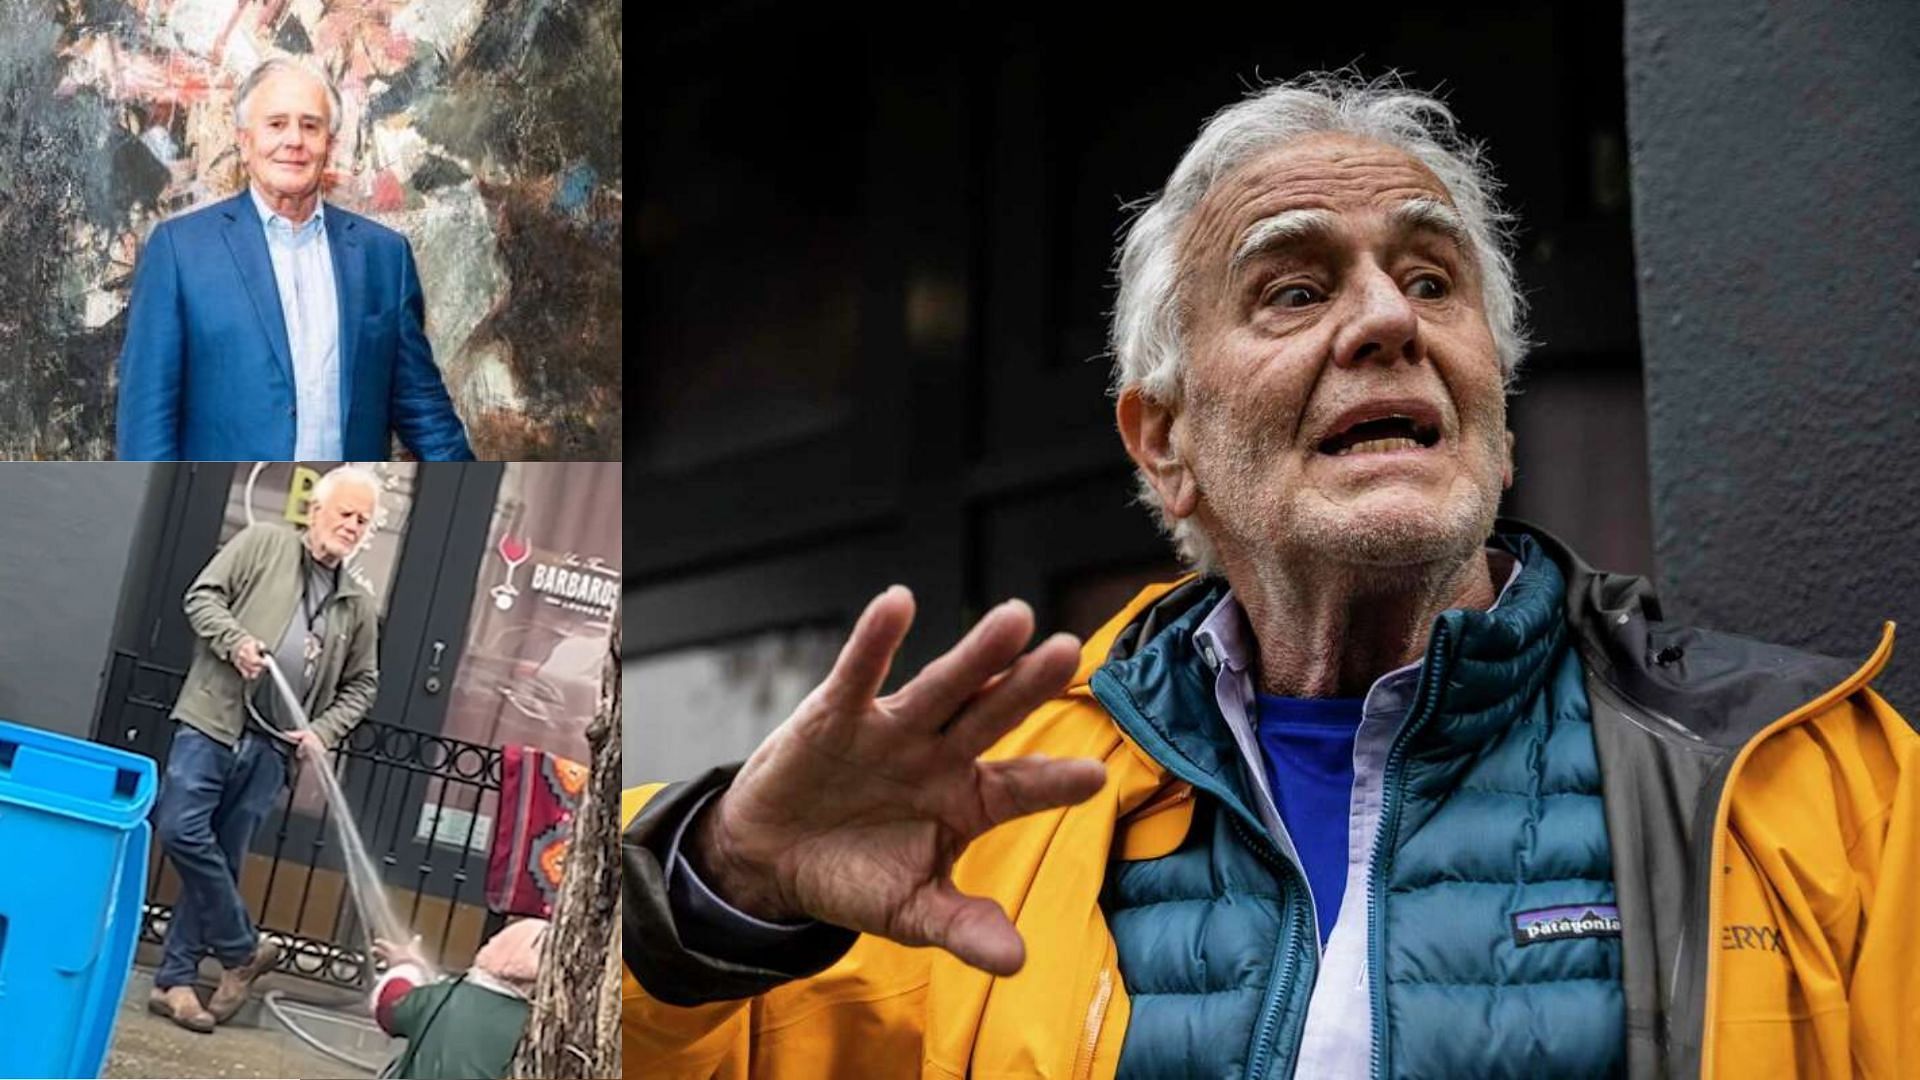 Posh gallery owner, Collier Gwin, seen spraying a homeless woman (Image via Getty/Stephen Lam)